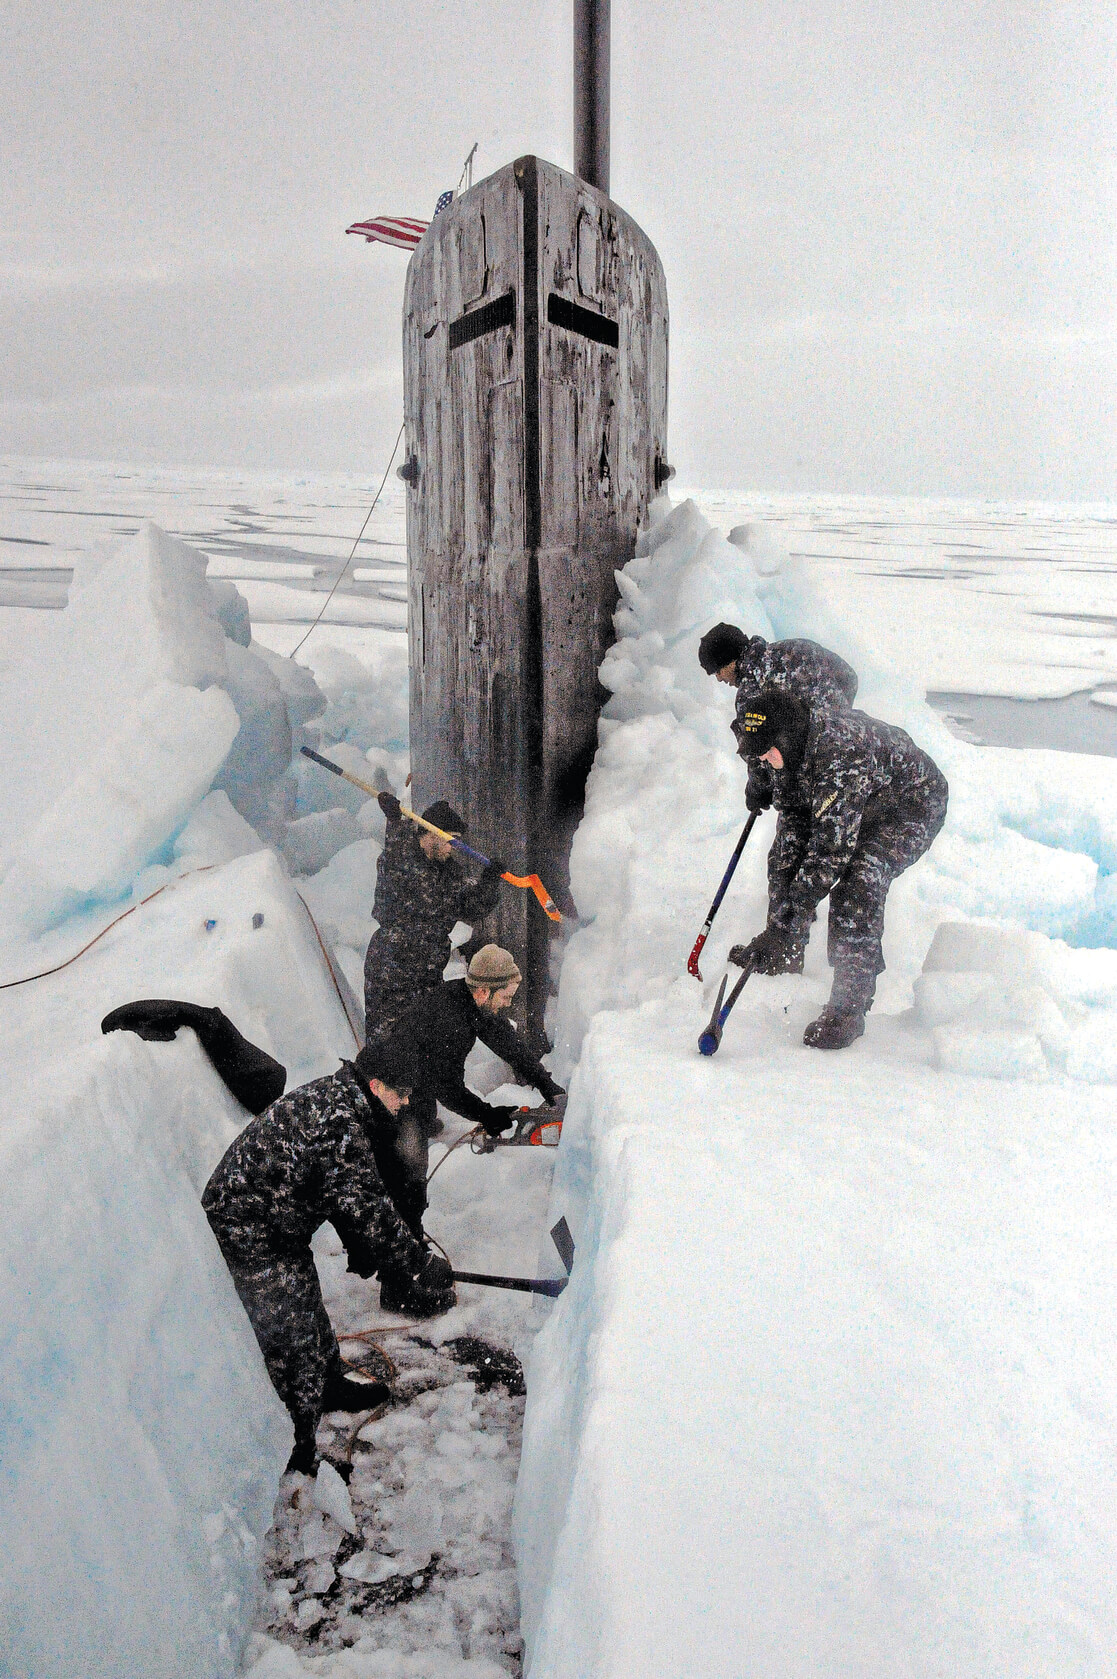 People digging out ice in Alaska